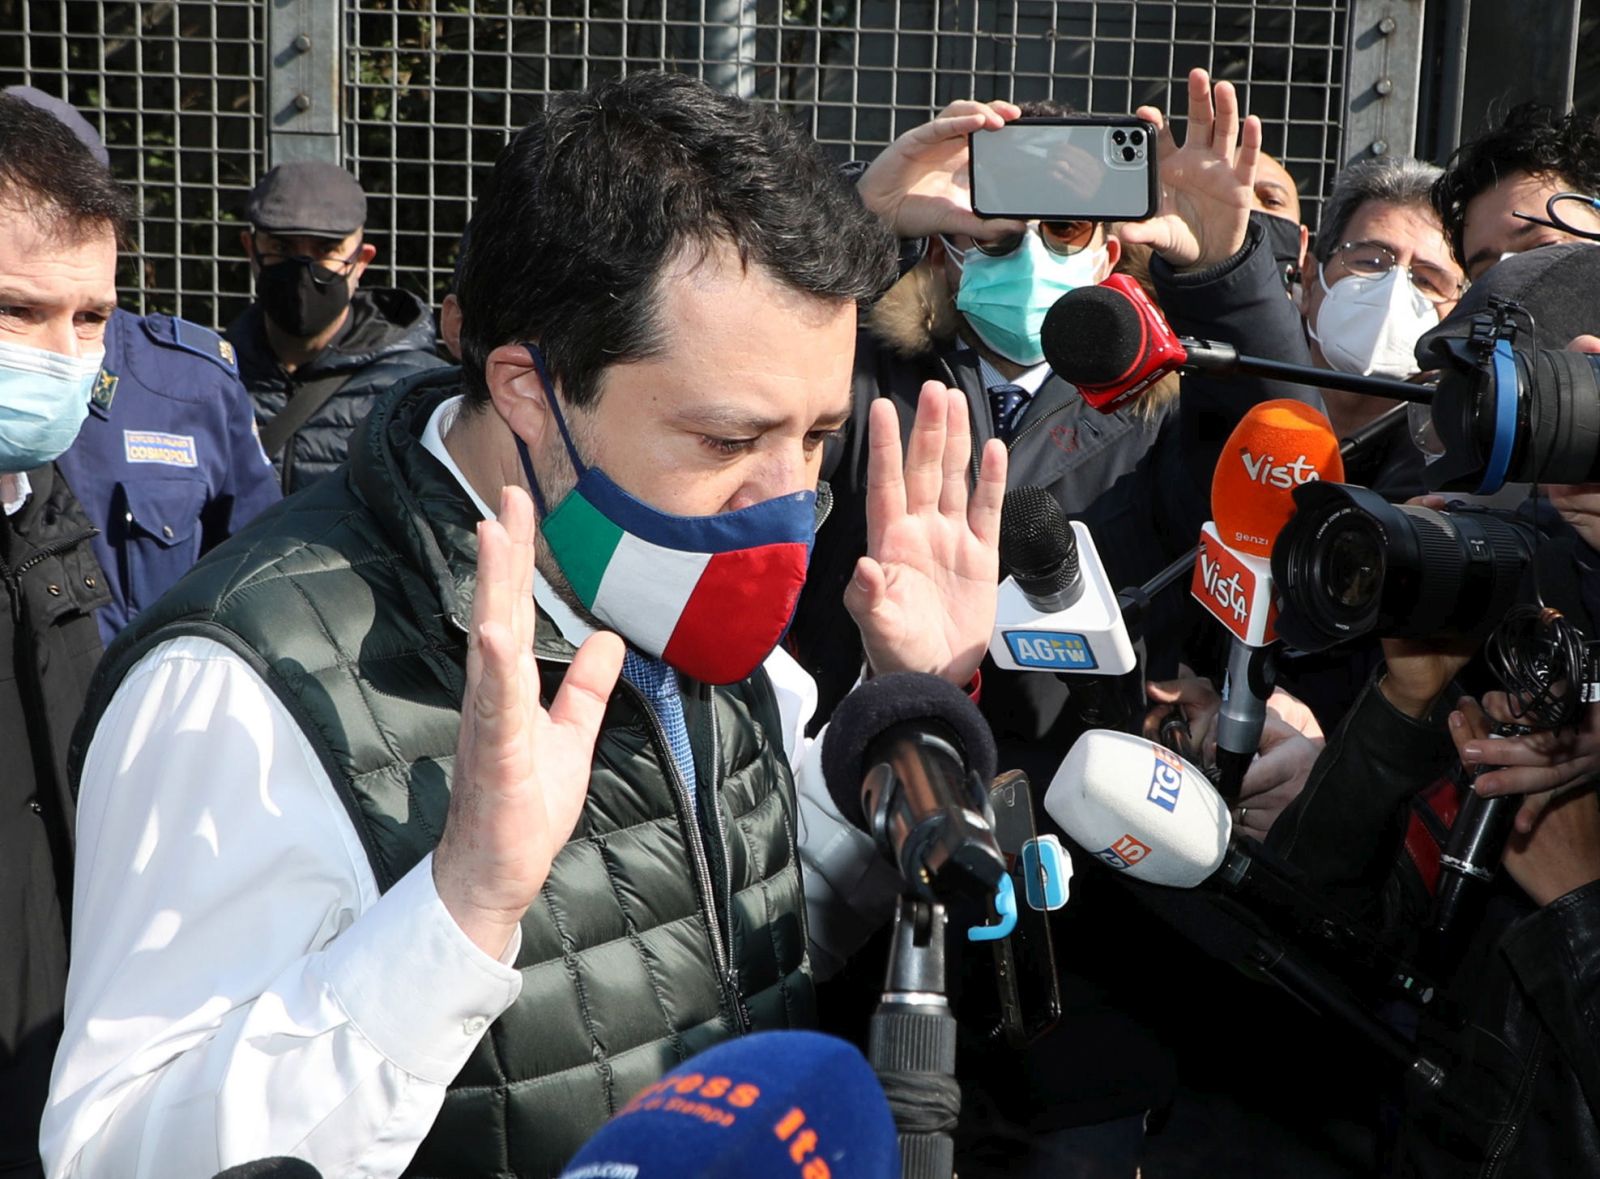 epa09071497 Lega Nord (Northern League) leader Matteo Salvini meets the press before visiting the hospital set up inside one of the pavilions of Fiera Milano City, in Milan, Italy, 13 March 2021. Most of Italy is expected to be a COVID-19 red zone next week, due to a sharp rise in contagion and new rules the government is expected to apply on how to classify regions in the nation's tiered system of coronavirus-linked restrictions.  EPA/MATTEO BAZZI